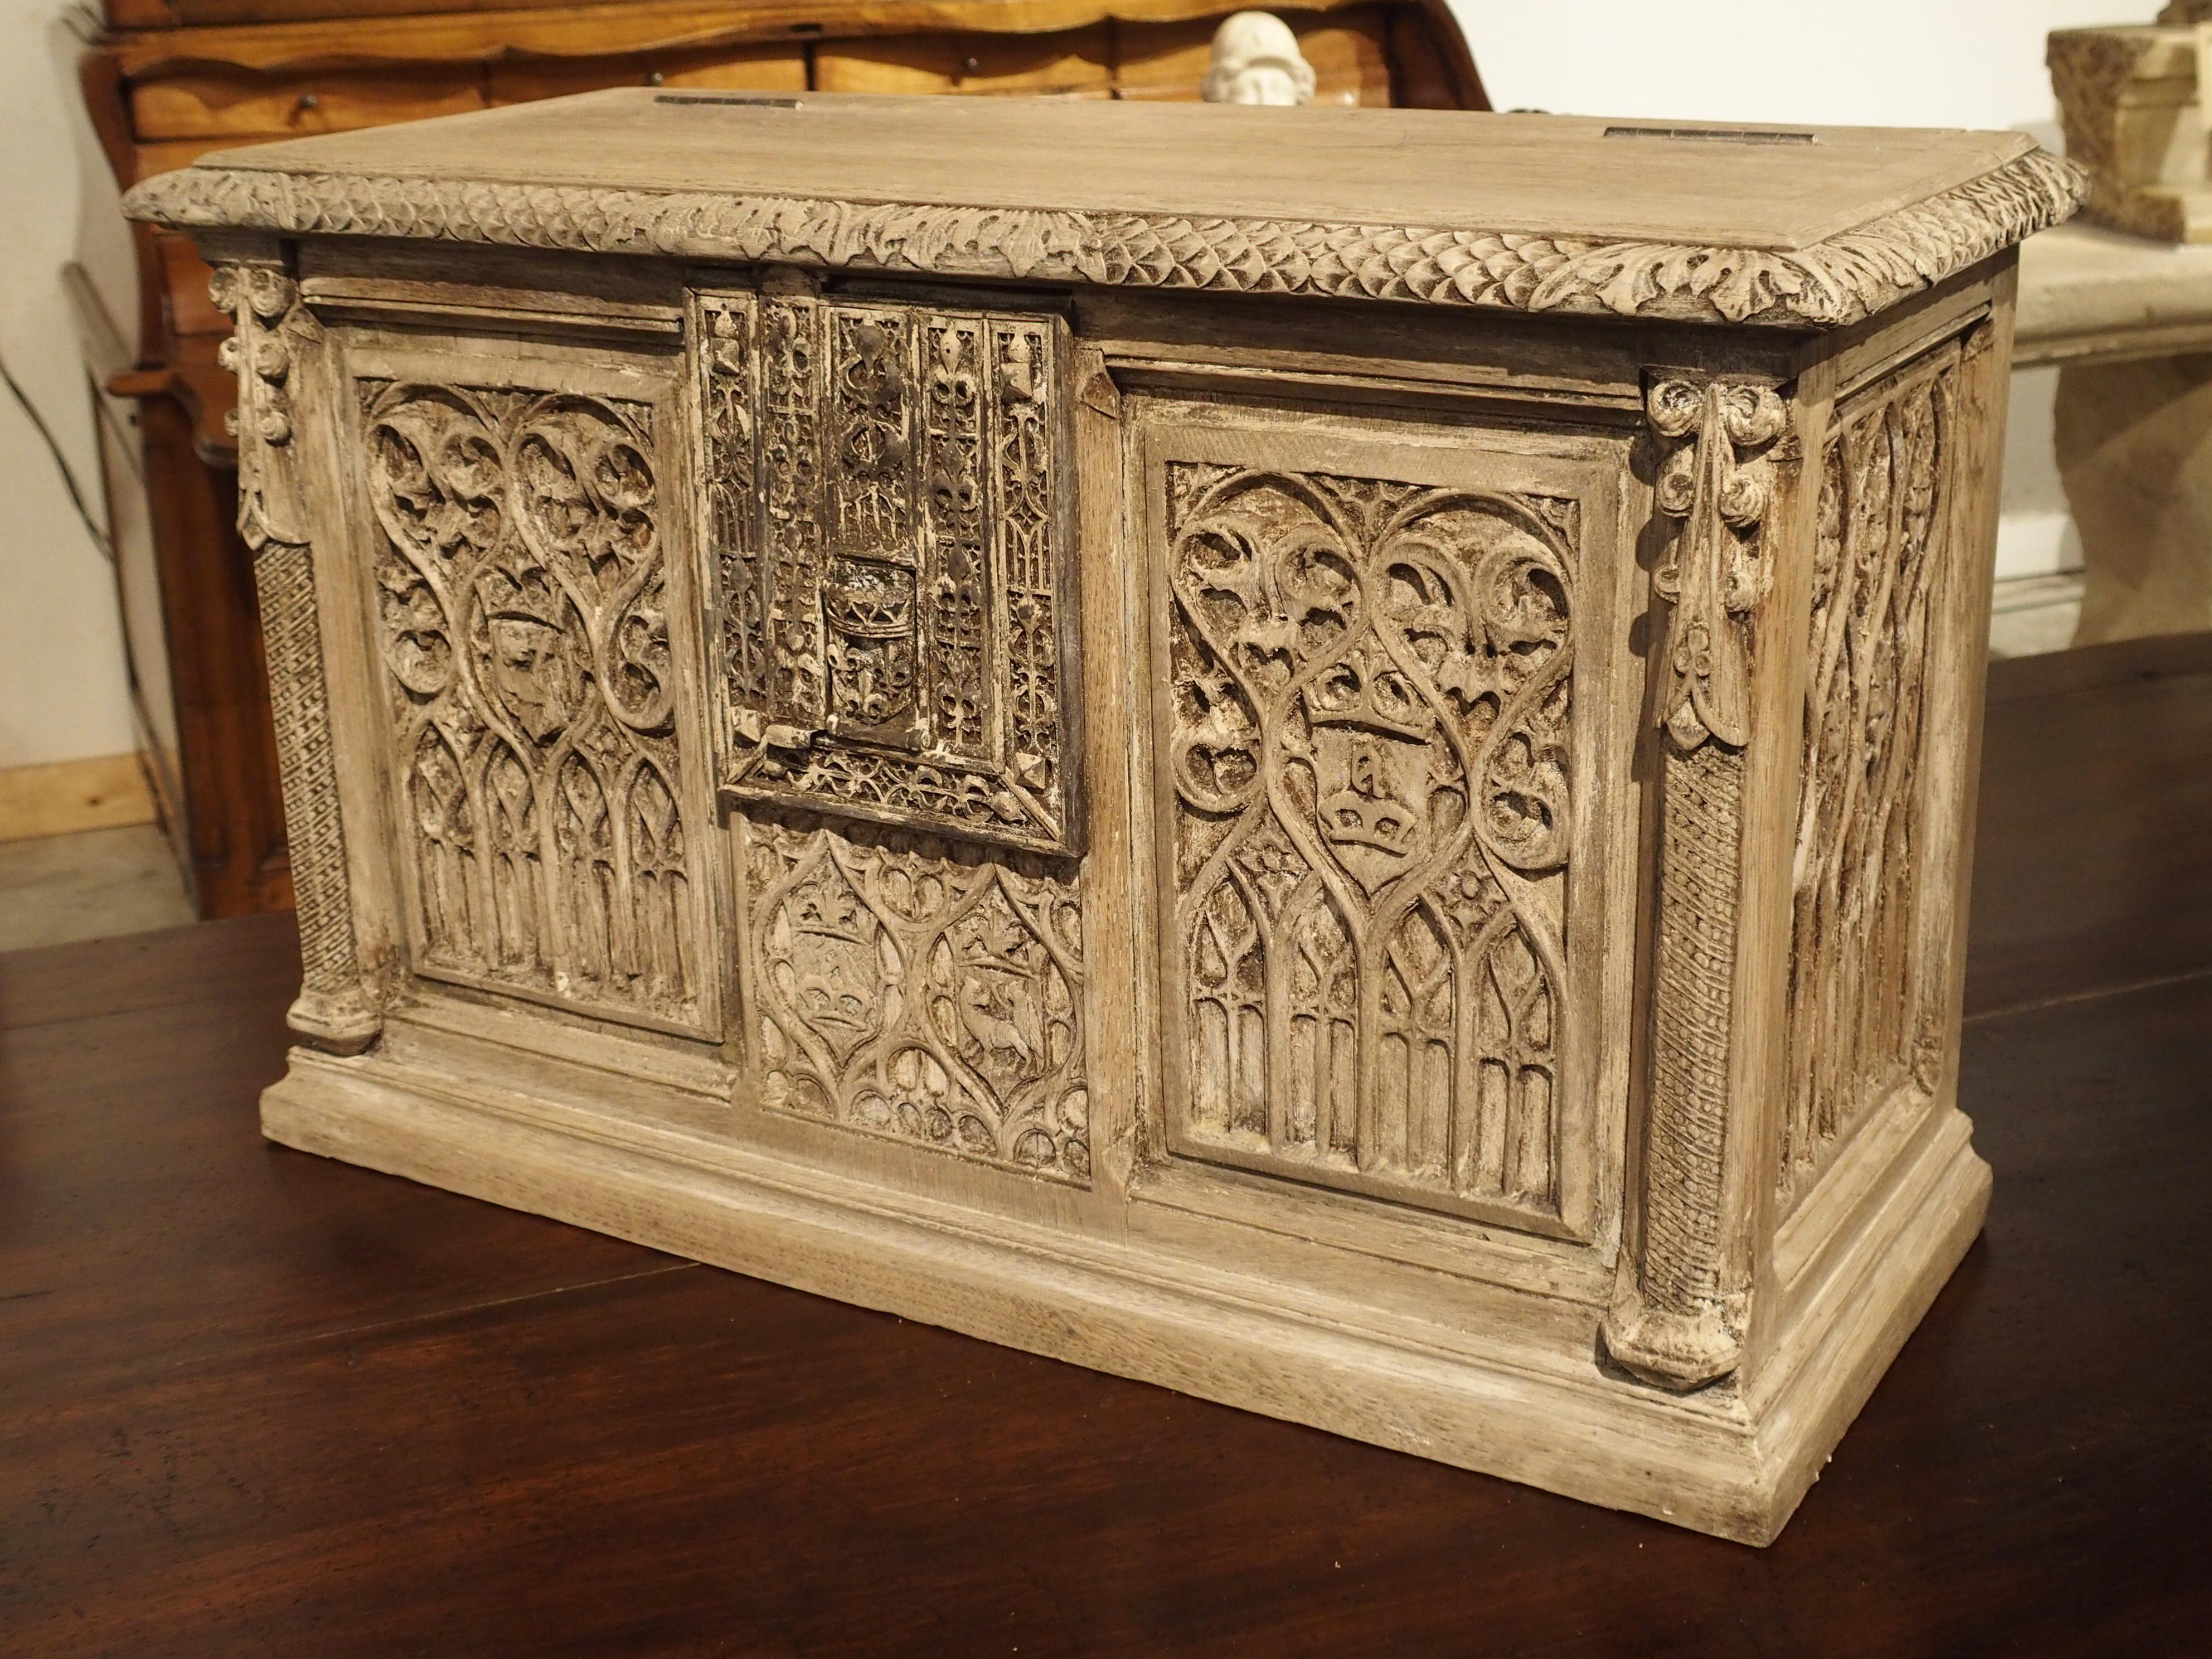 This small French trunk is made from oak and has been stripped at some point in its history. White gesso remains in some areas, which brings out the details in the carvings. It dates to the late 1800’s, however, the panels are from an earlier